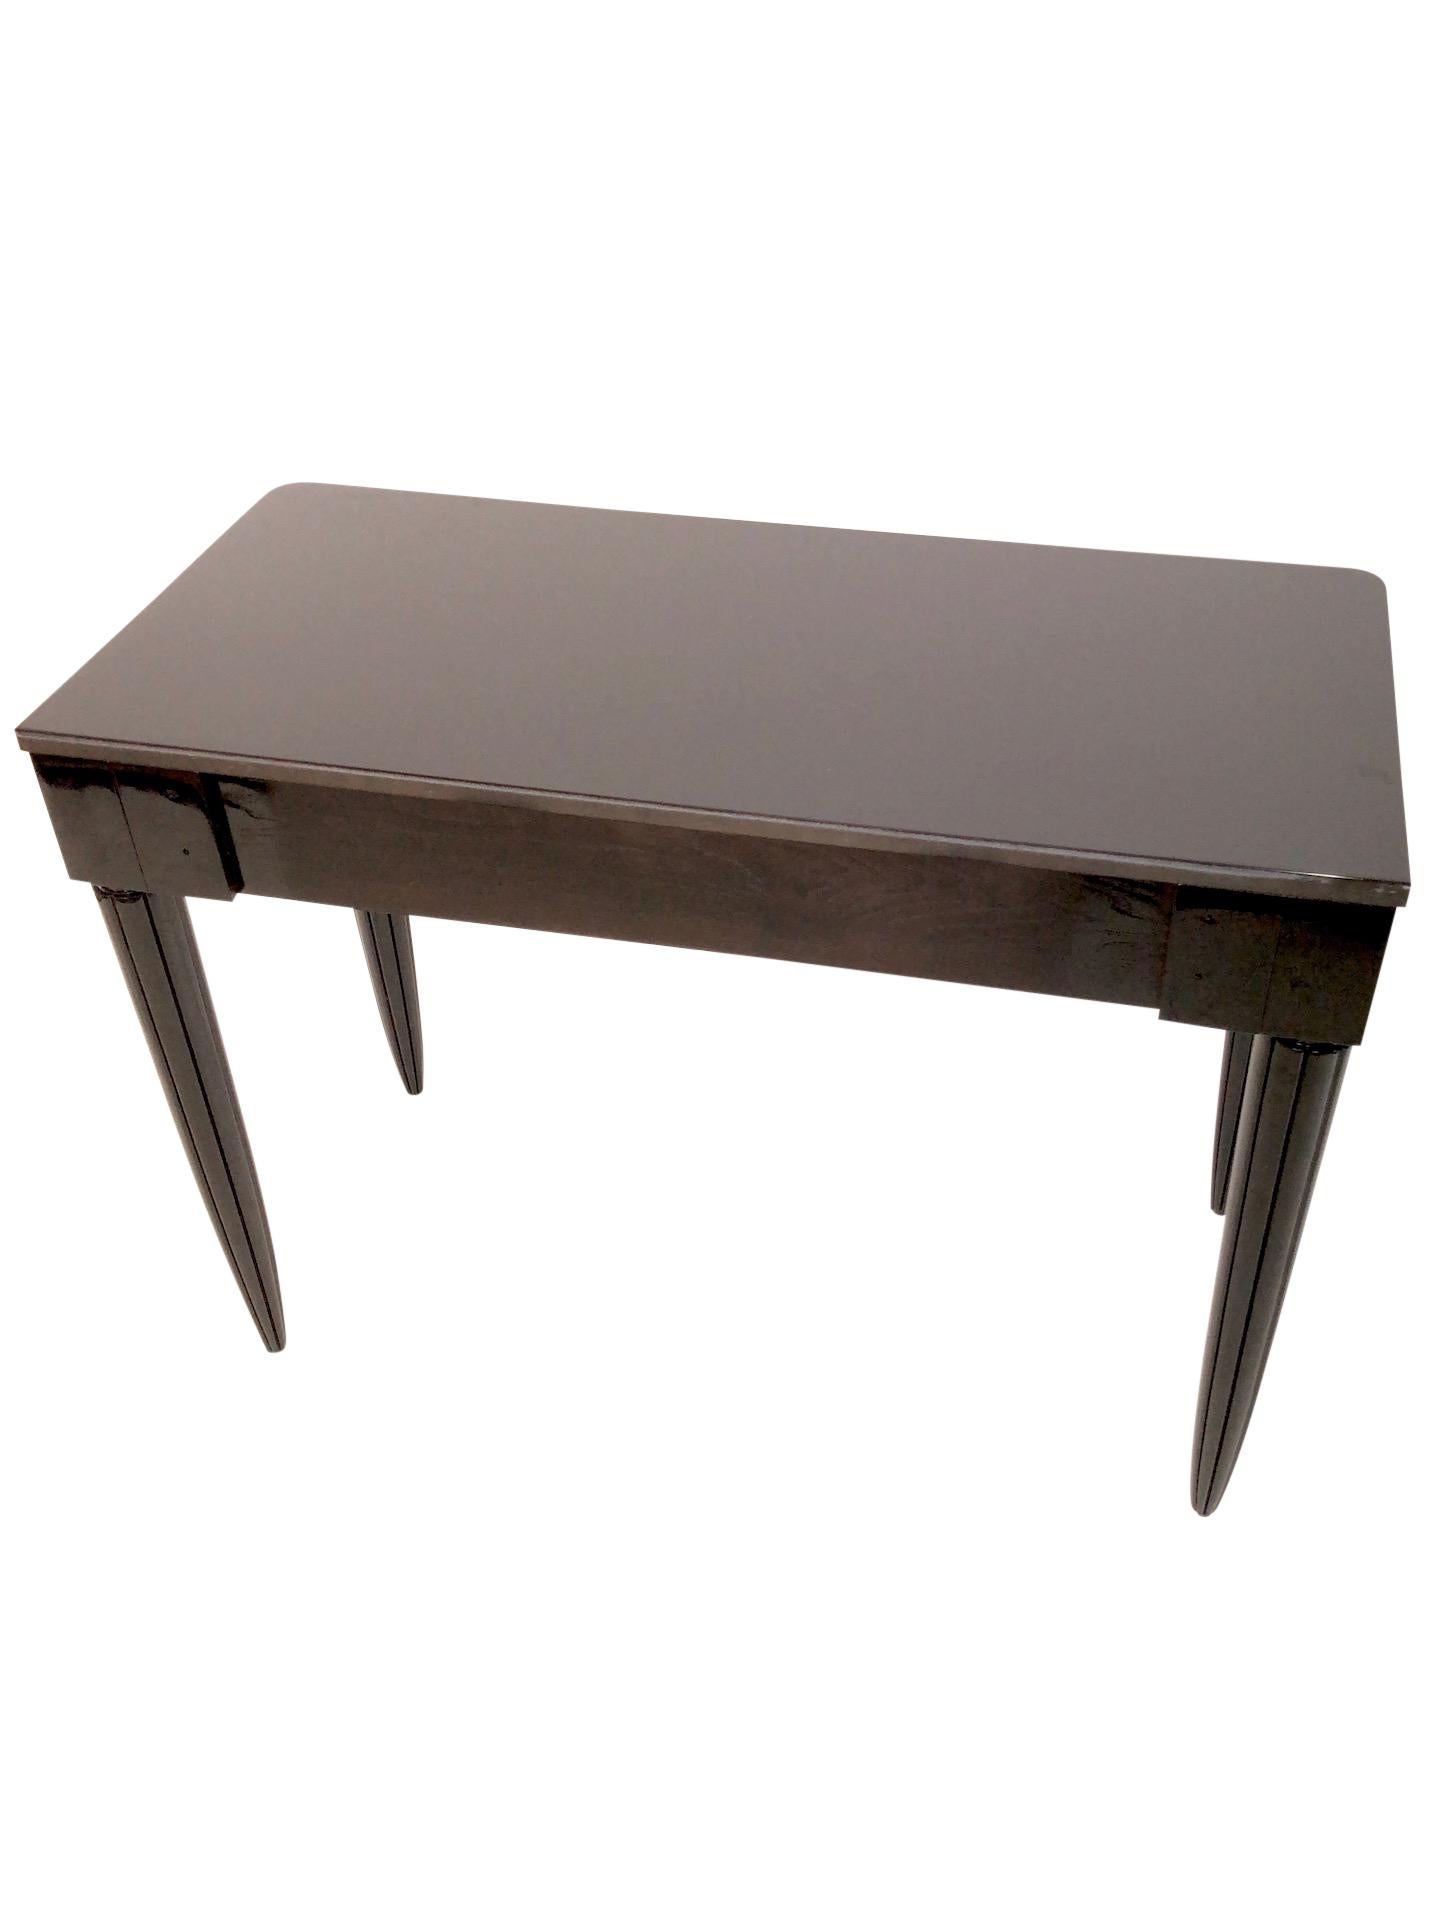 Wood Small Black Early Art Deco Desk with Two Drawers and Channeled Table-Legs For Sale